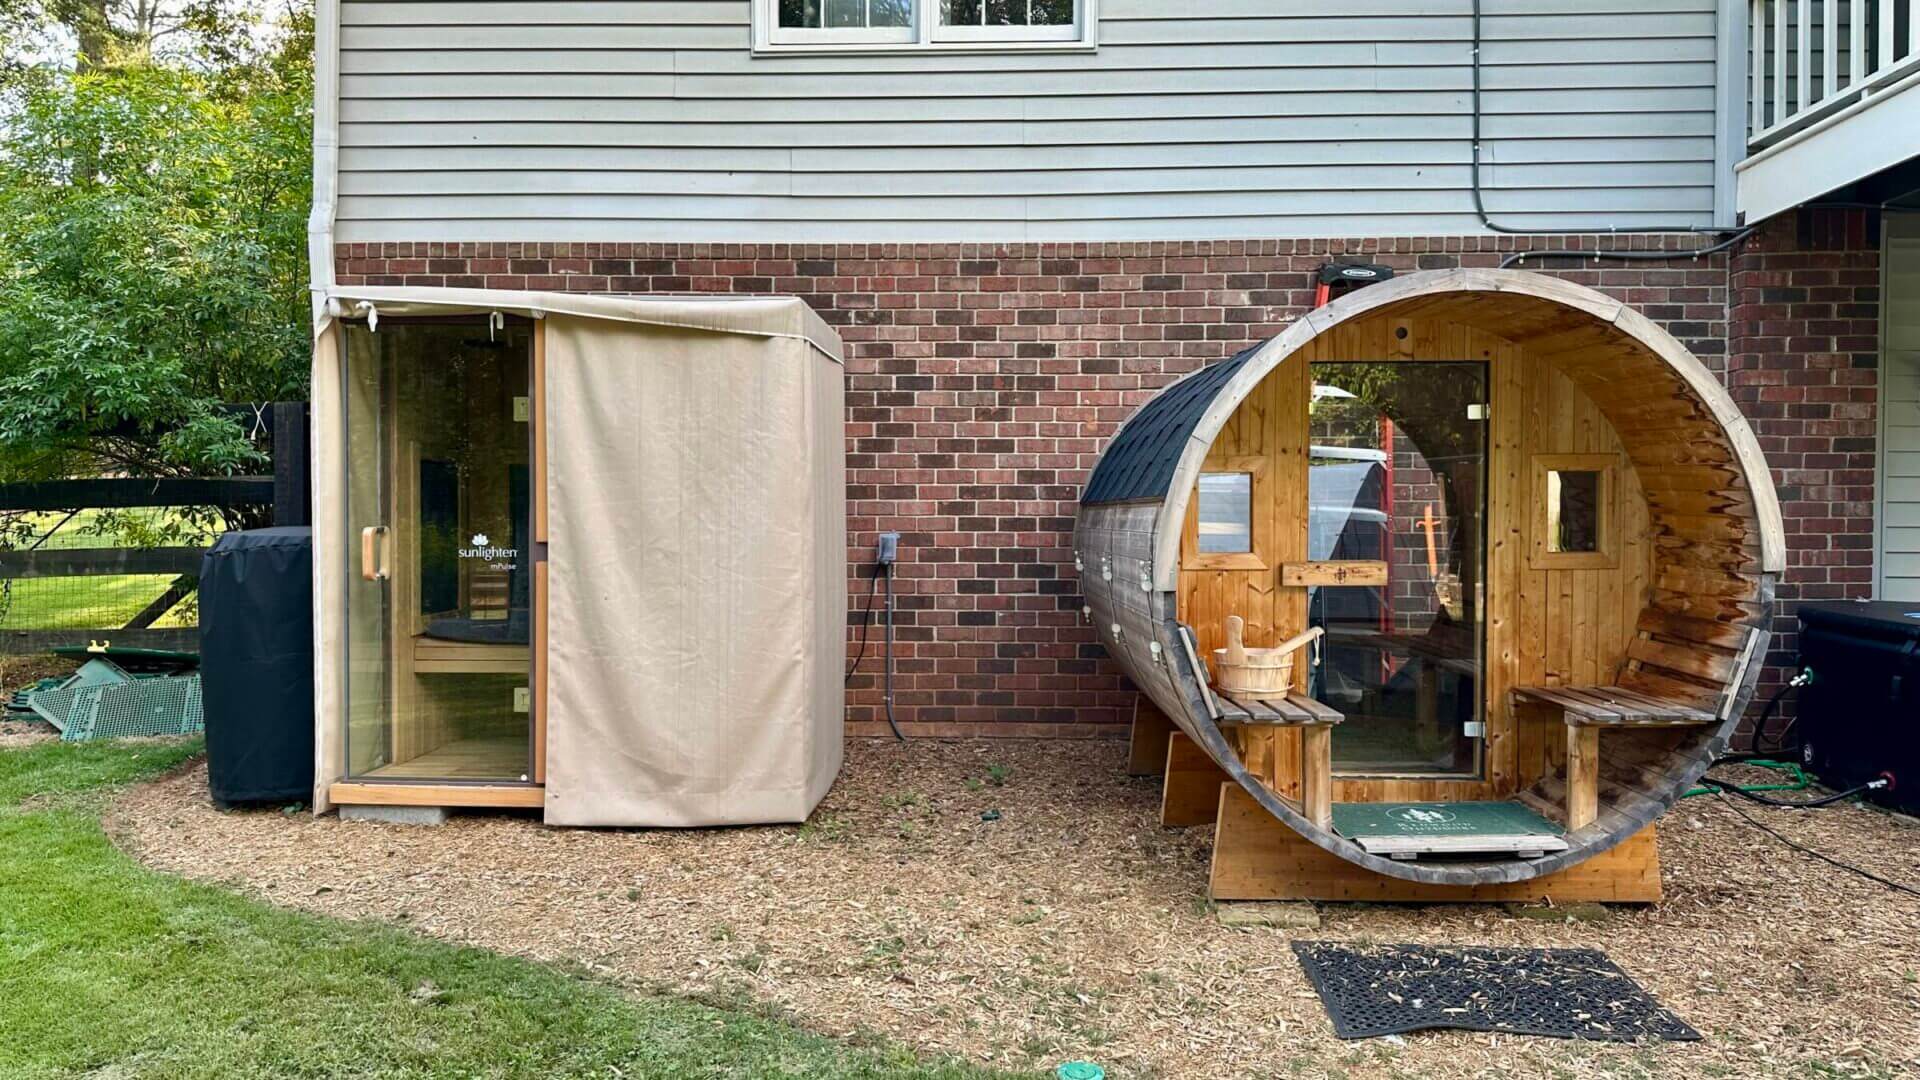 If you have the space, a walk-in sauna cabin offers an incredible sauna experience. This photo shows our Sunlighten mPulse infrared sauna (left) next to our Redwood Outdoors steam sauna (right). We use them both!